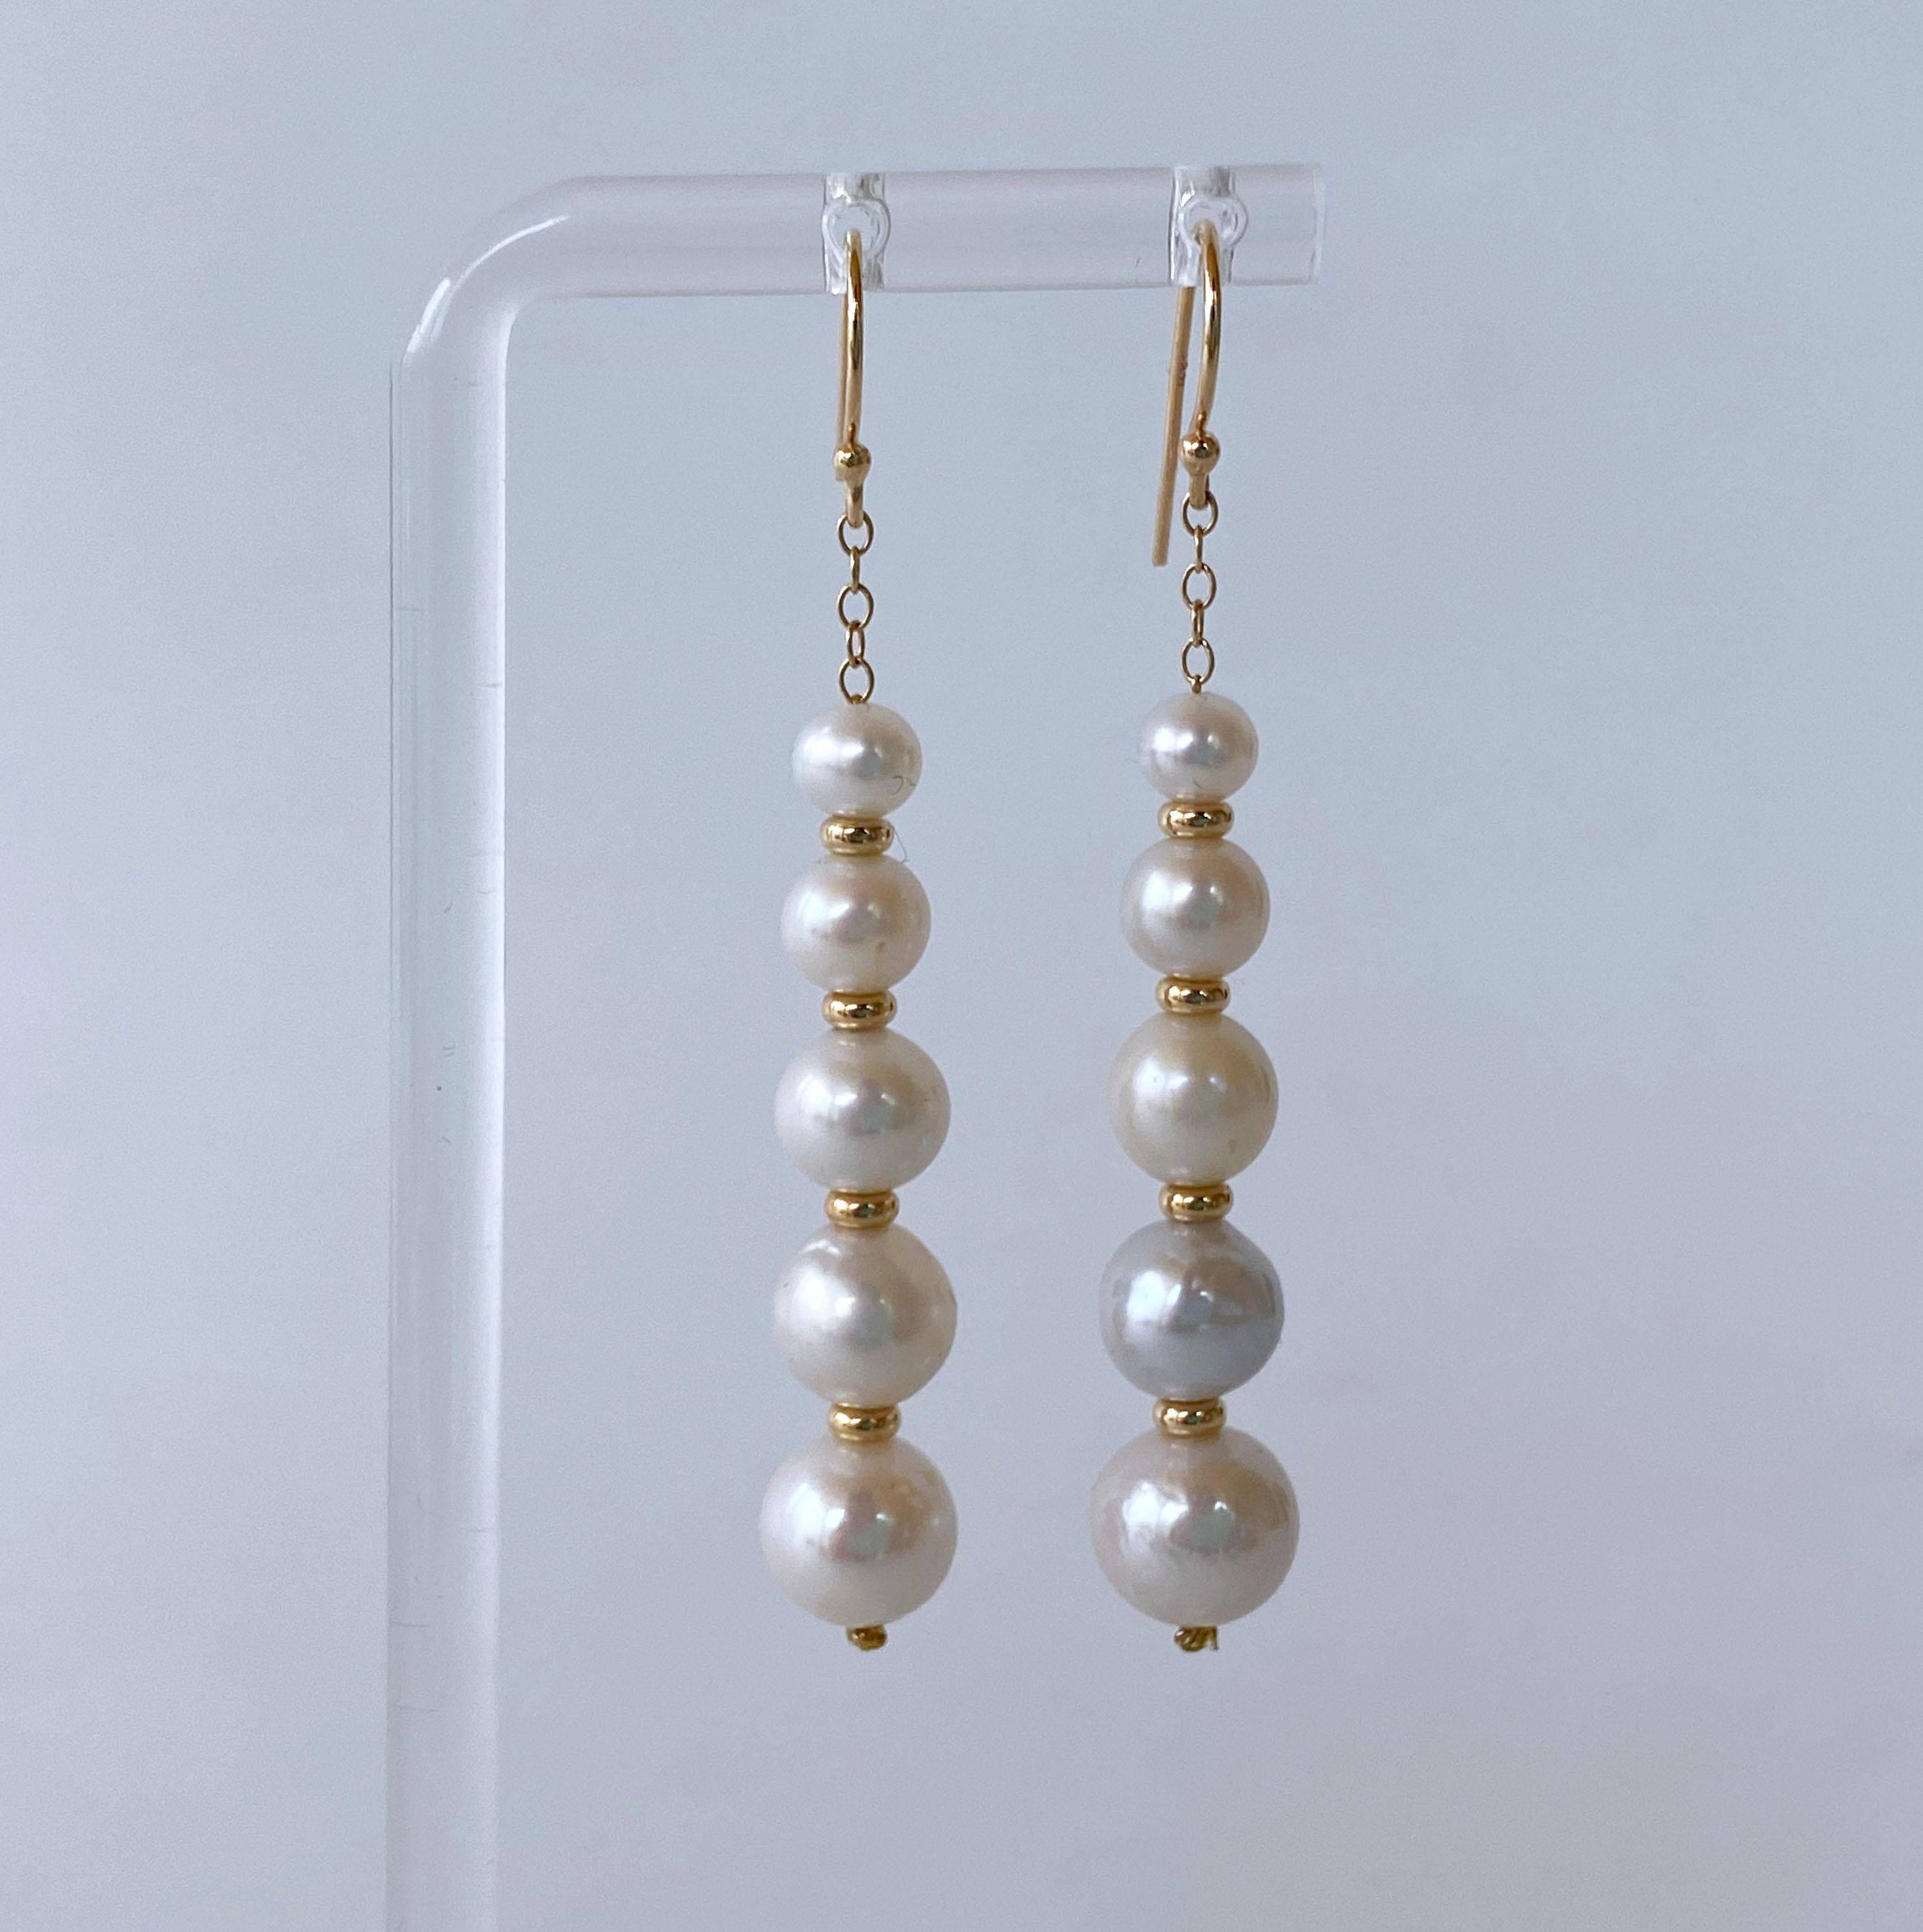 Beautiful and Elegant pair of Earrings by Marina J. This pair is made with all solid 14k Yellow Gold chain, hooks and beads. A row of Pearls Graduating in size hang off solid 14k Yellow Gold Chain. The white Pearls display a soft iridescent luster